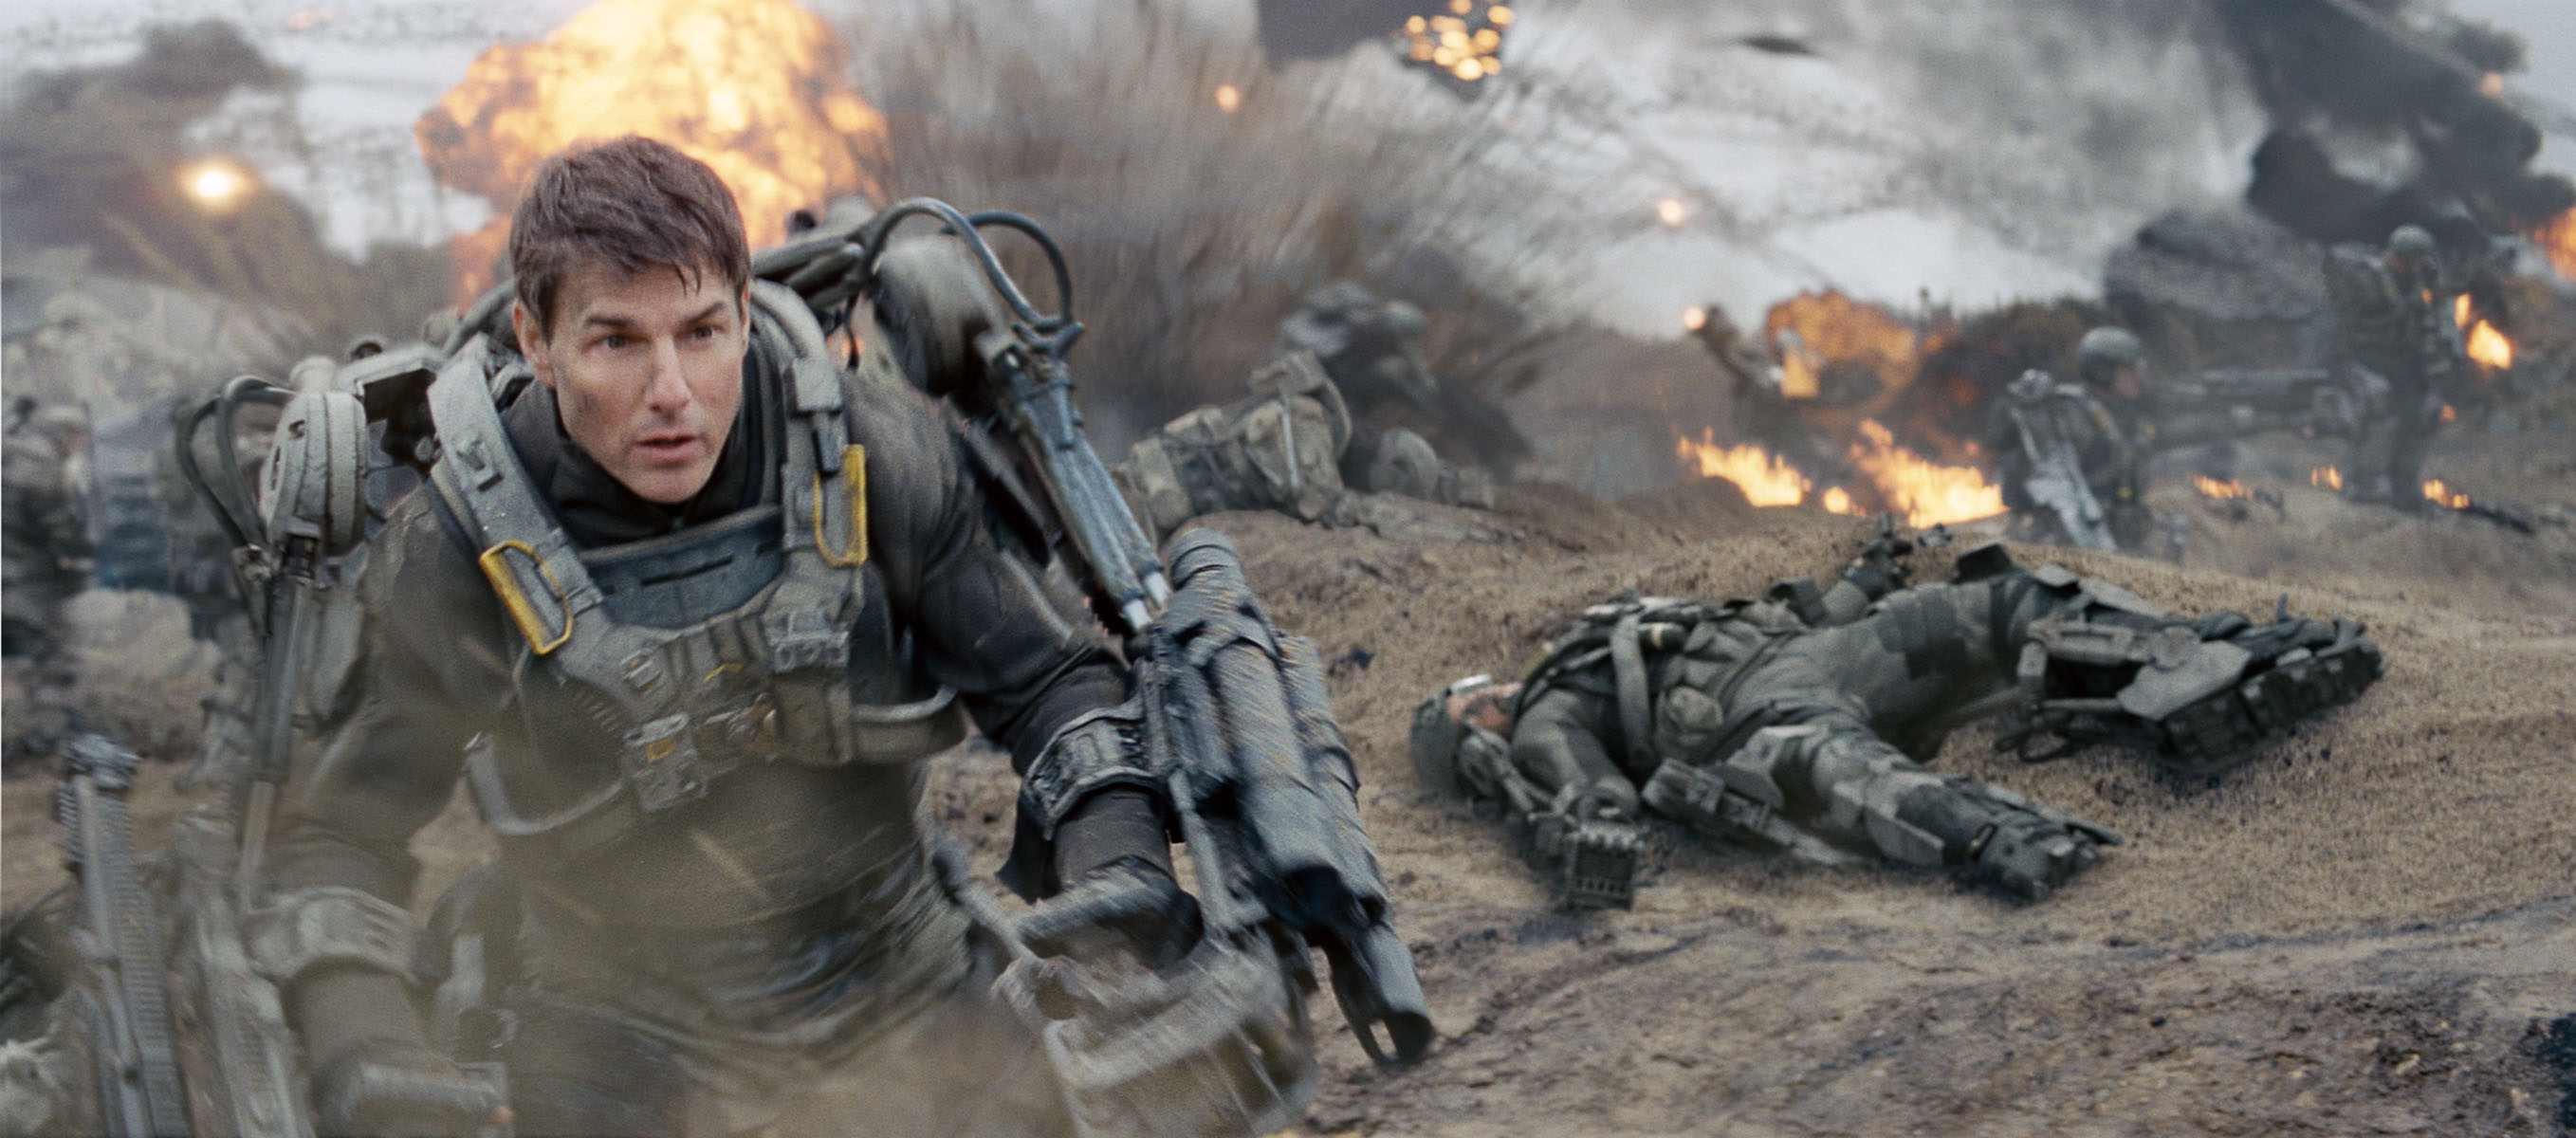 Edge of Tomorrow: Sci-fi thriller Featuring Tom Cruise and Emily Blunt. 2720x1200 Dual Screen Background.